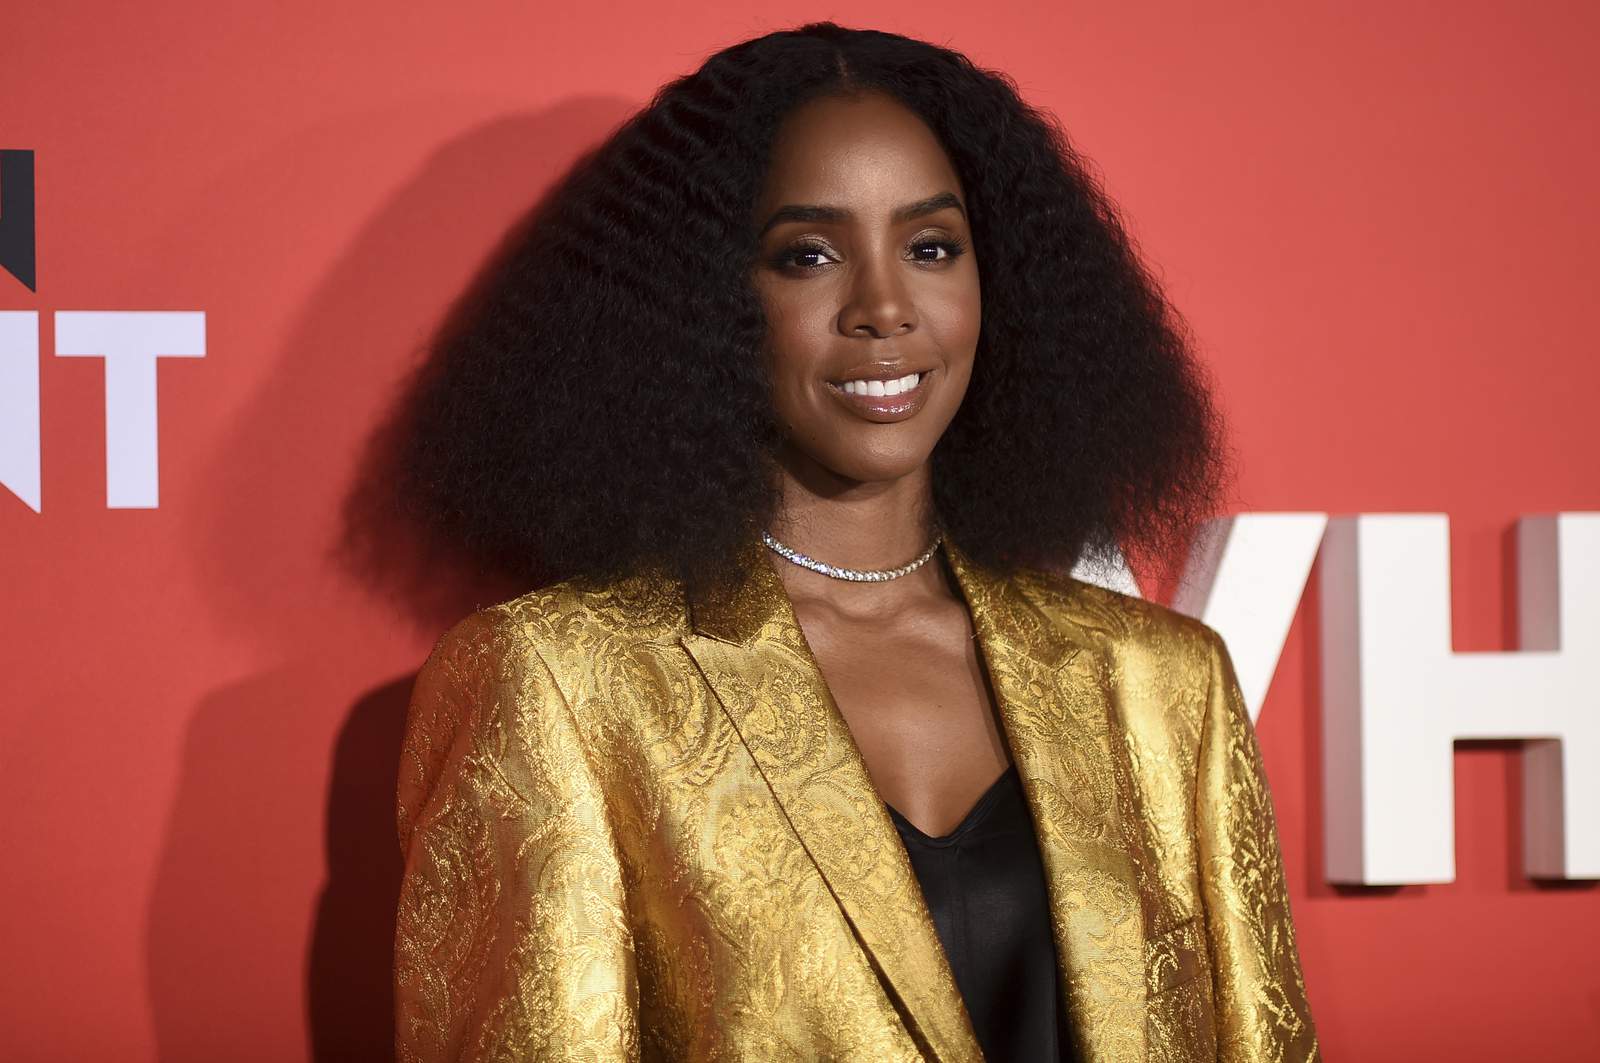 For Kelly Rowland, good things come in threes